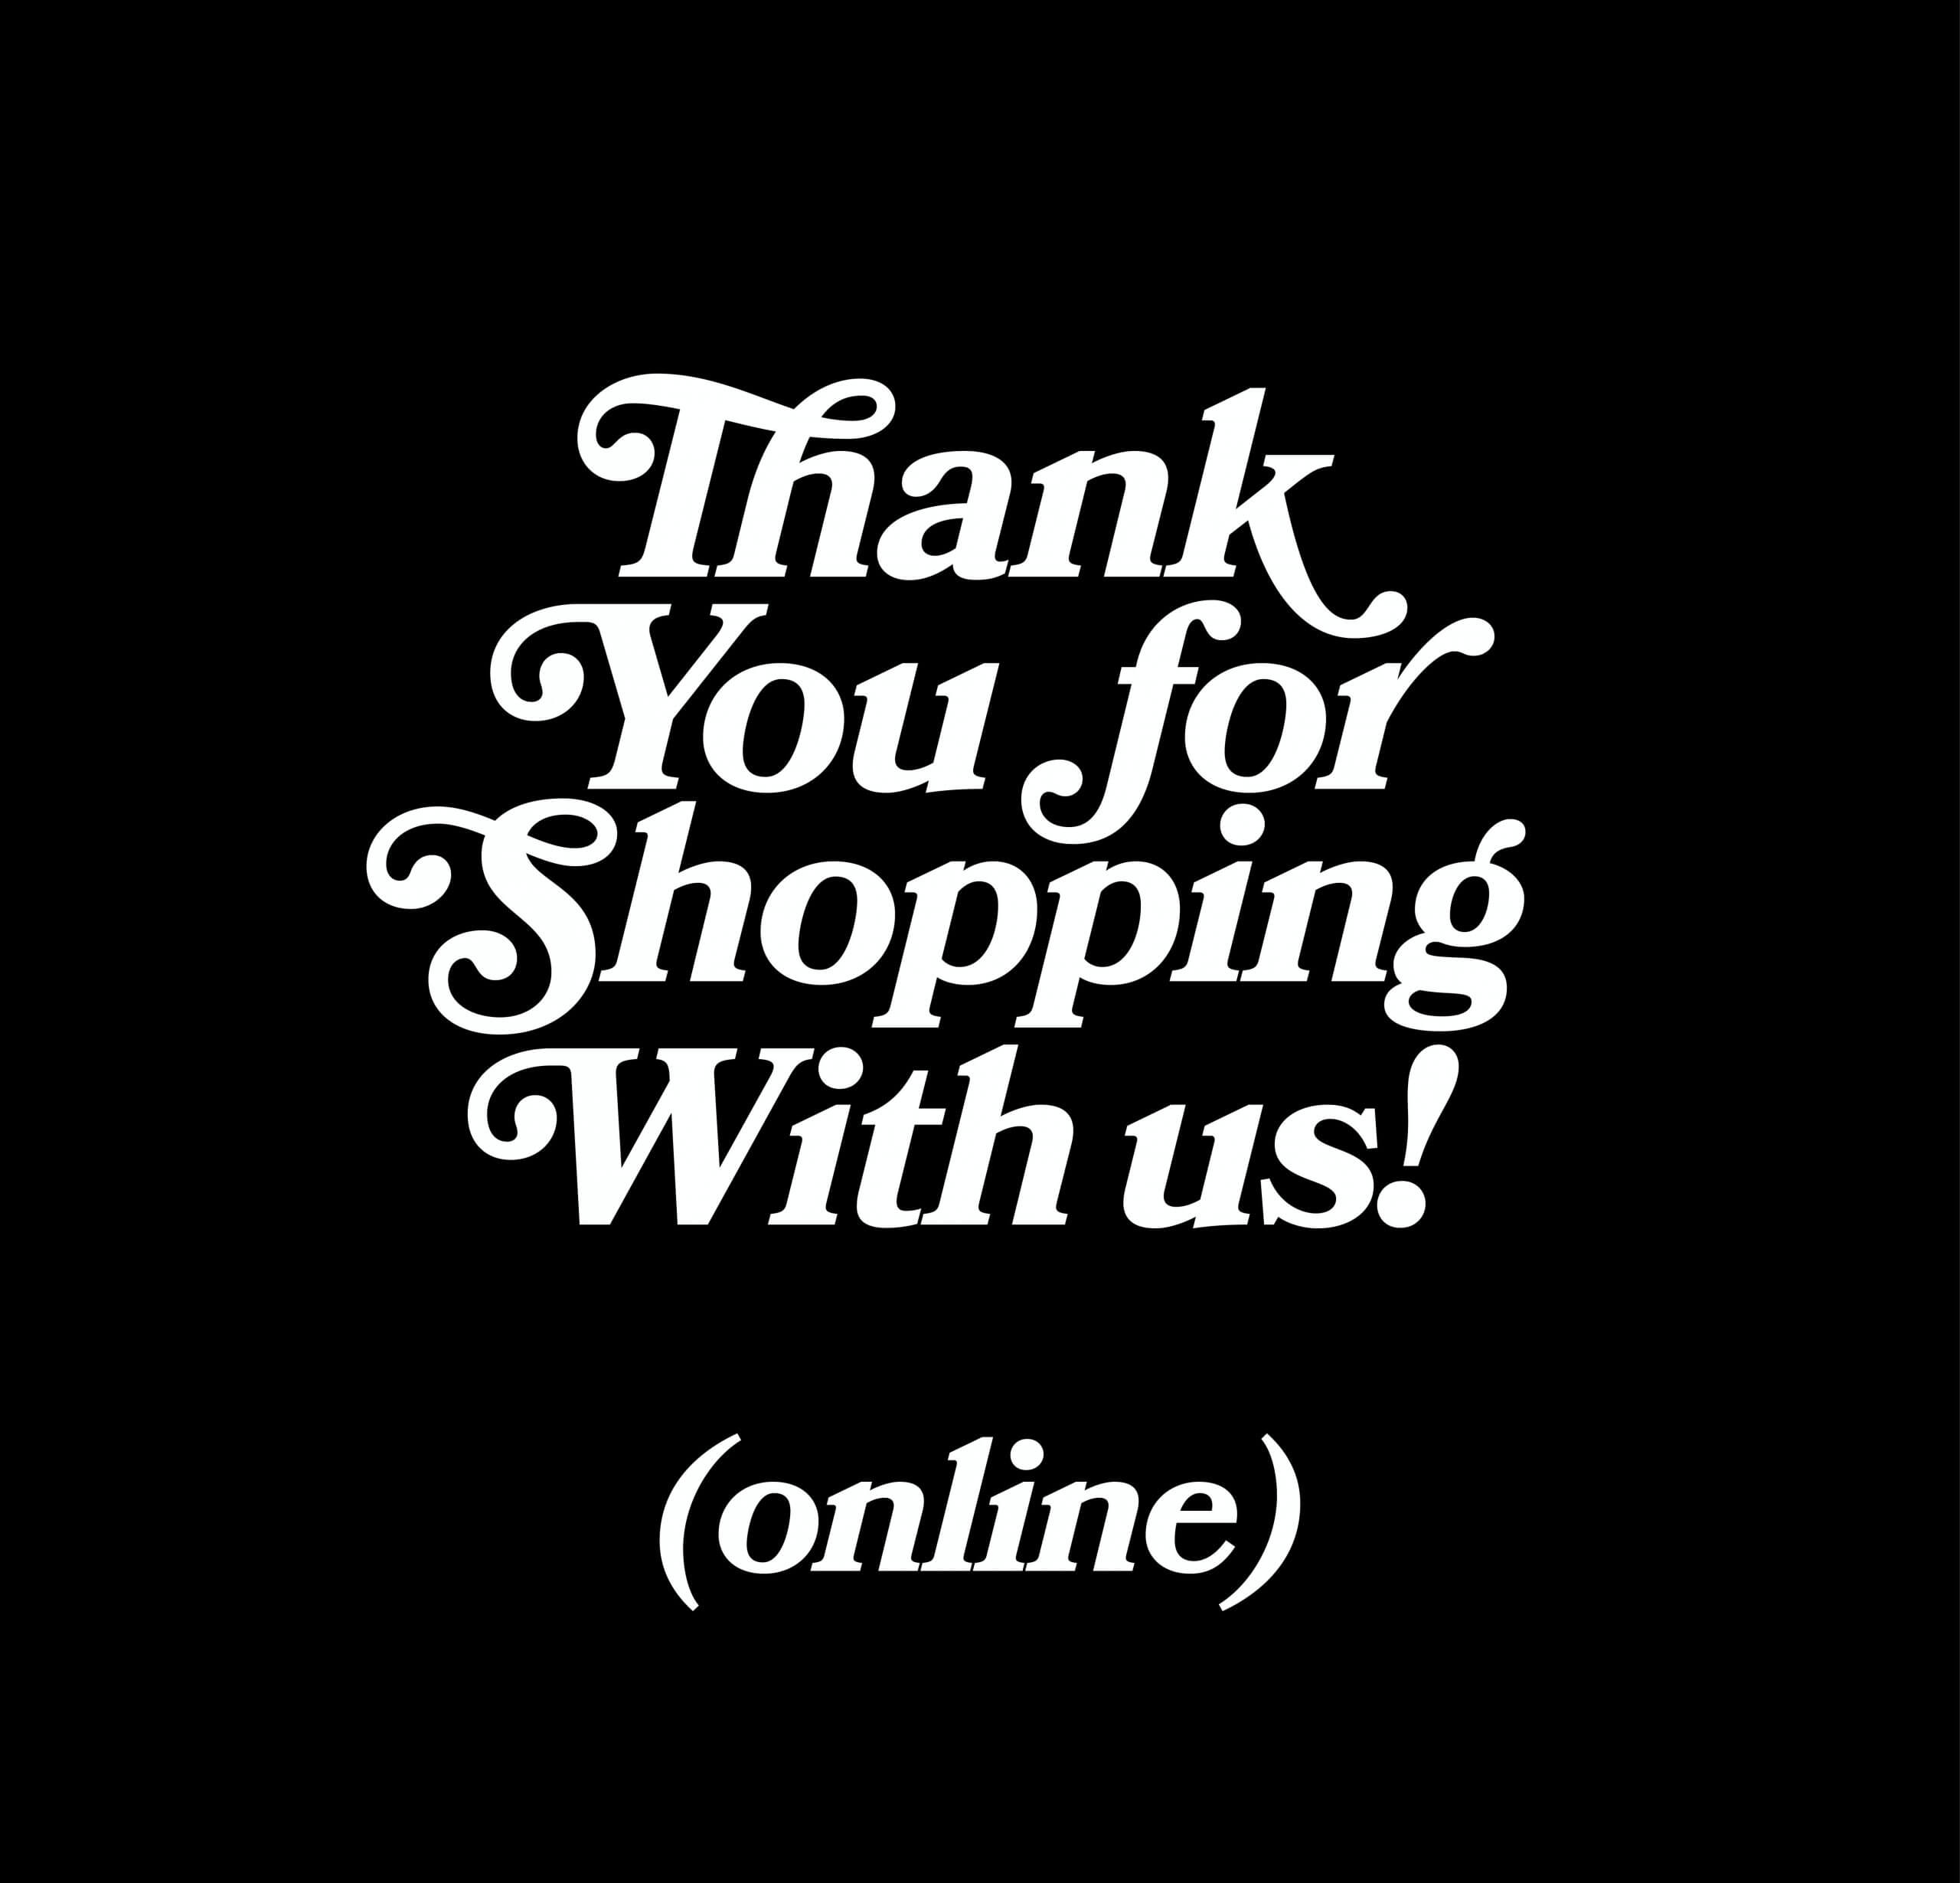 Thank you for shopping with us! (Online) logo image